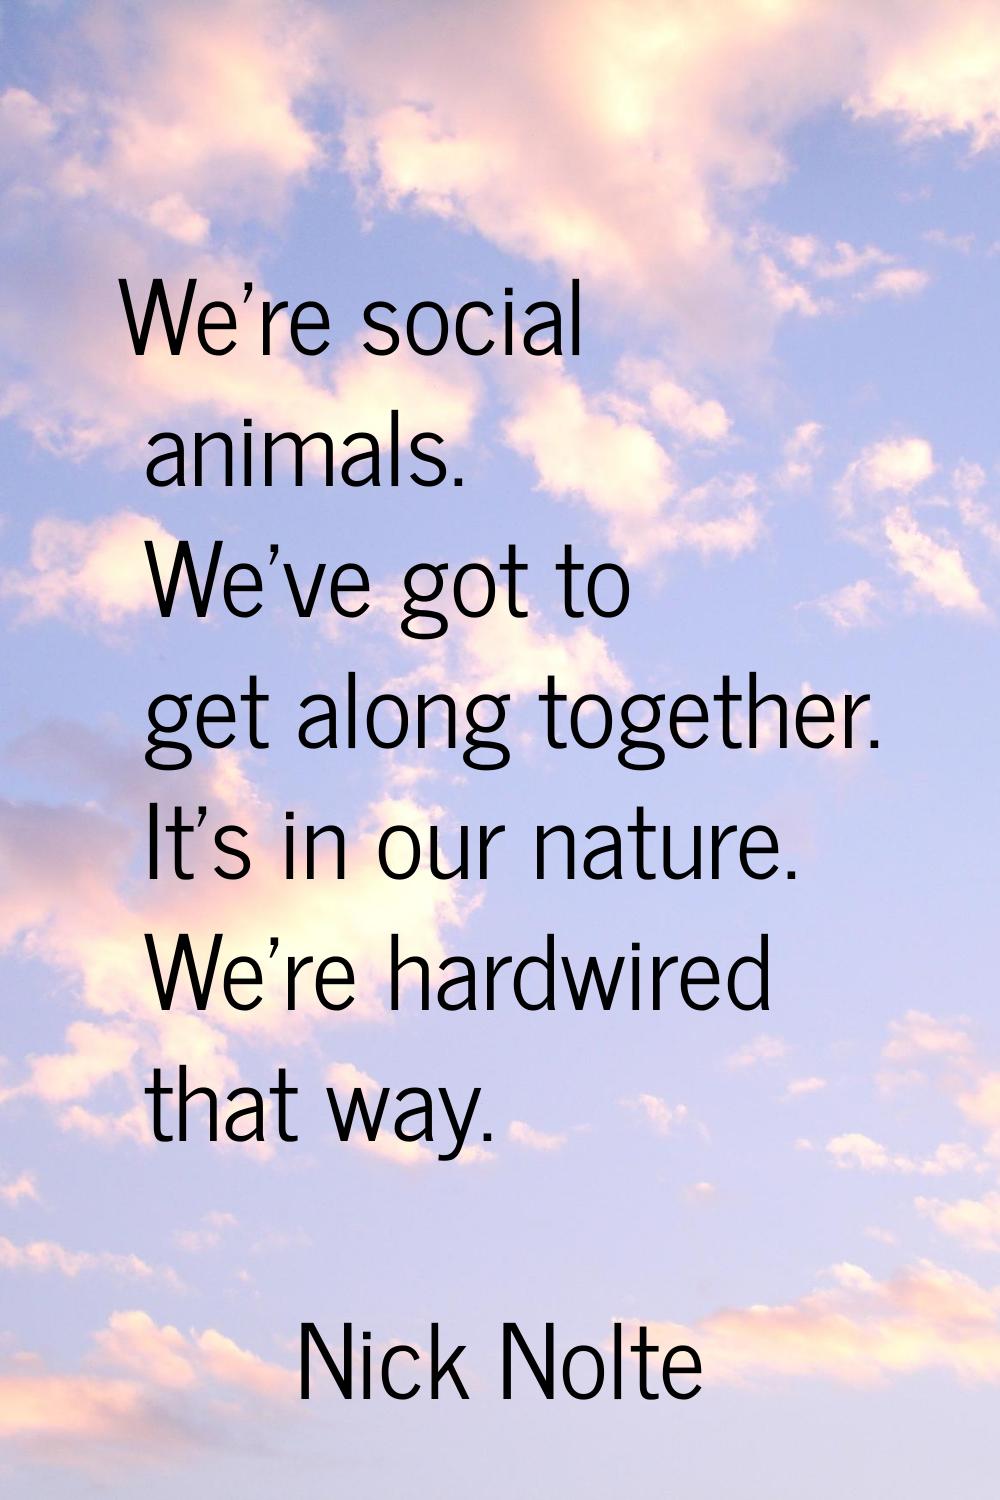 We're social animals. We've got to get along together. It's in our nature. We're hardwired that way